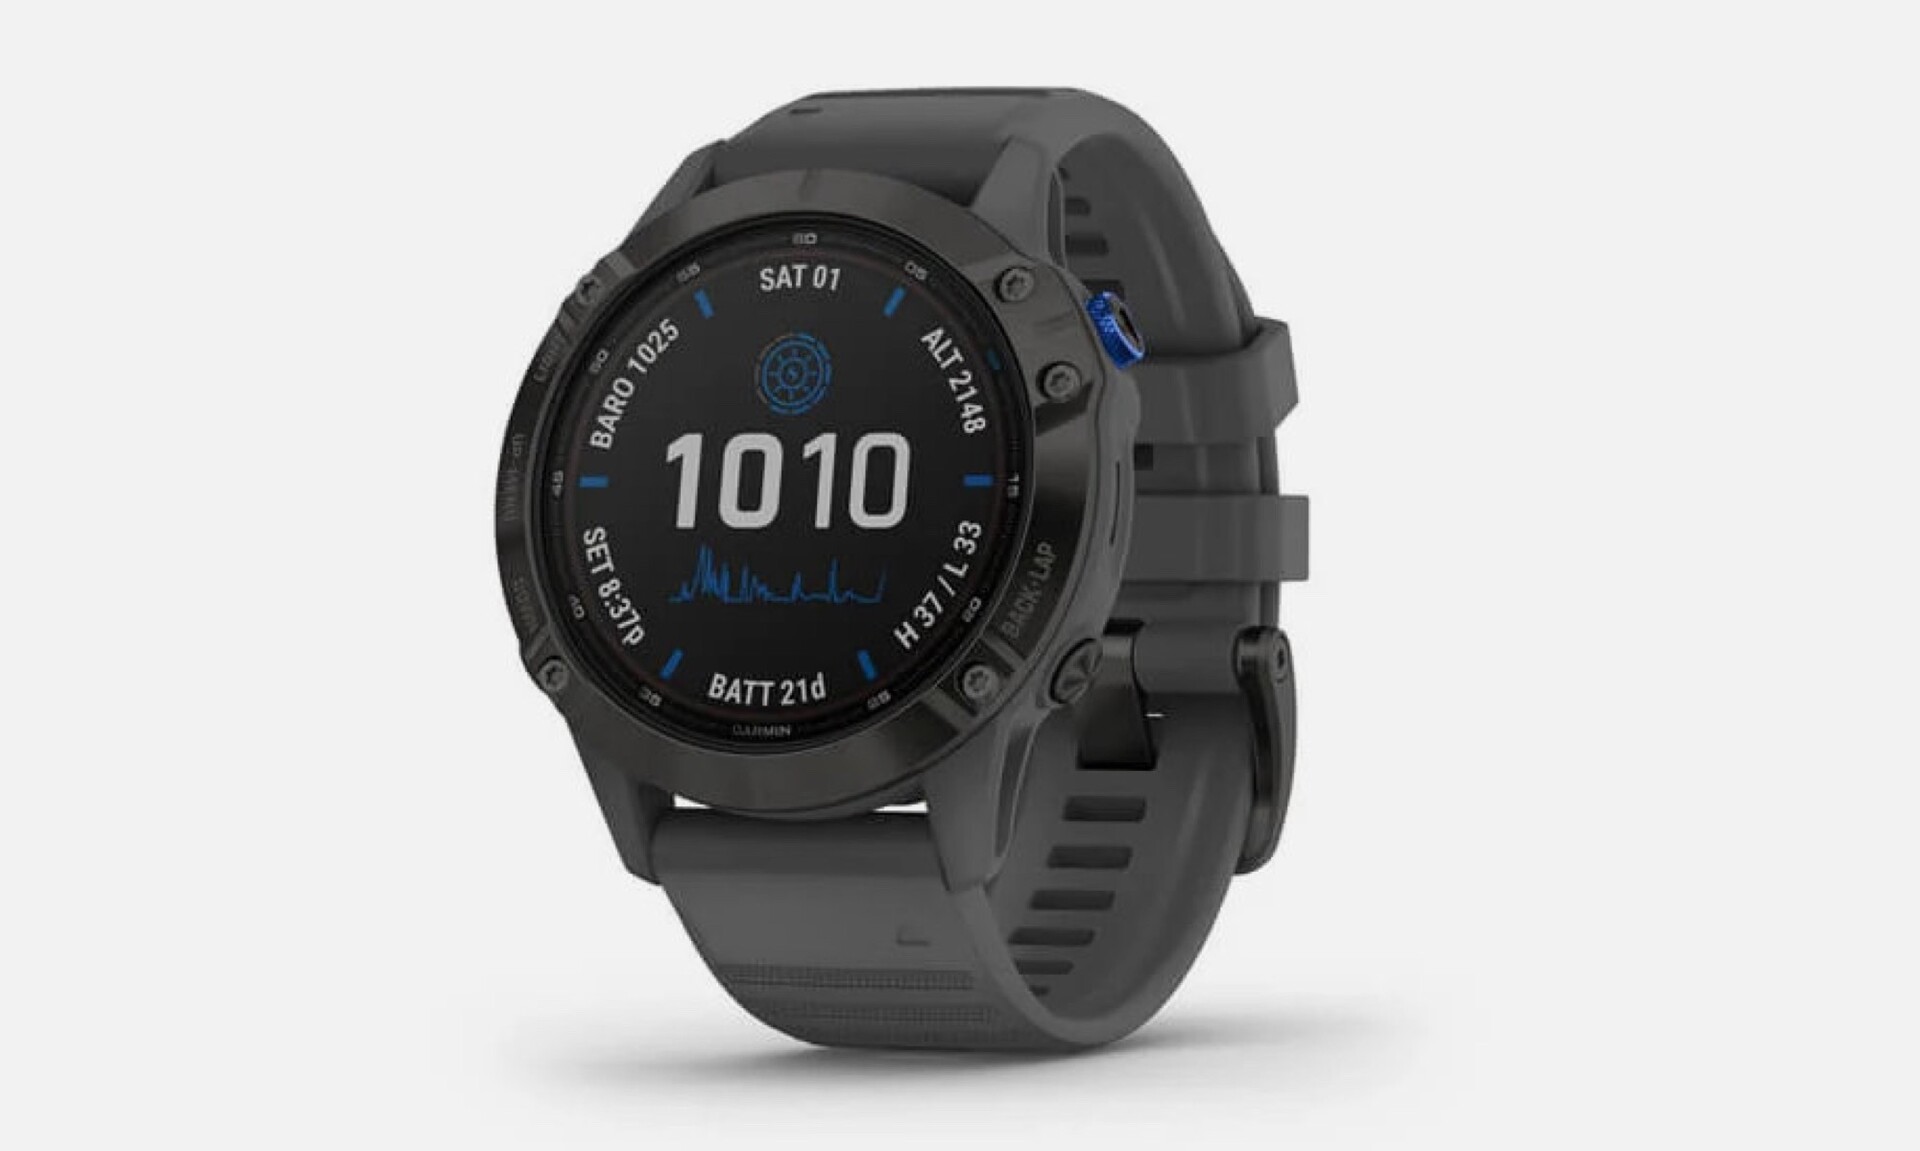 Garmin Fenix 6 series receives a update including support for Connect IQ system 5 - NotebookCheck.net News